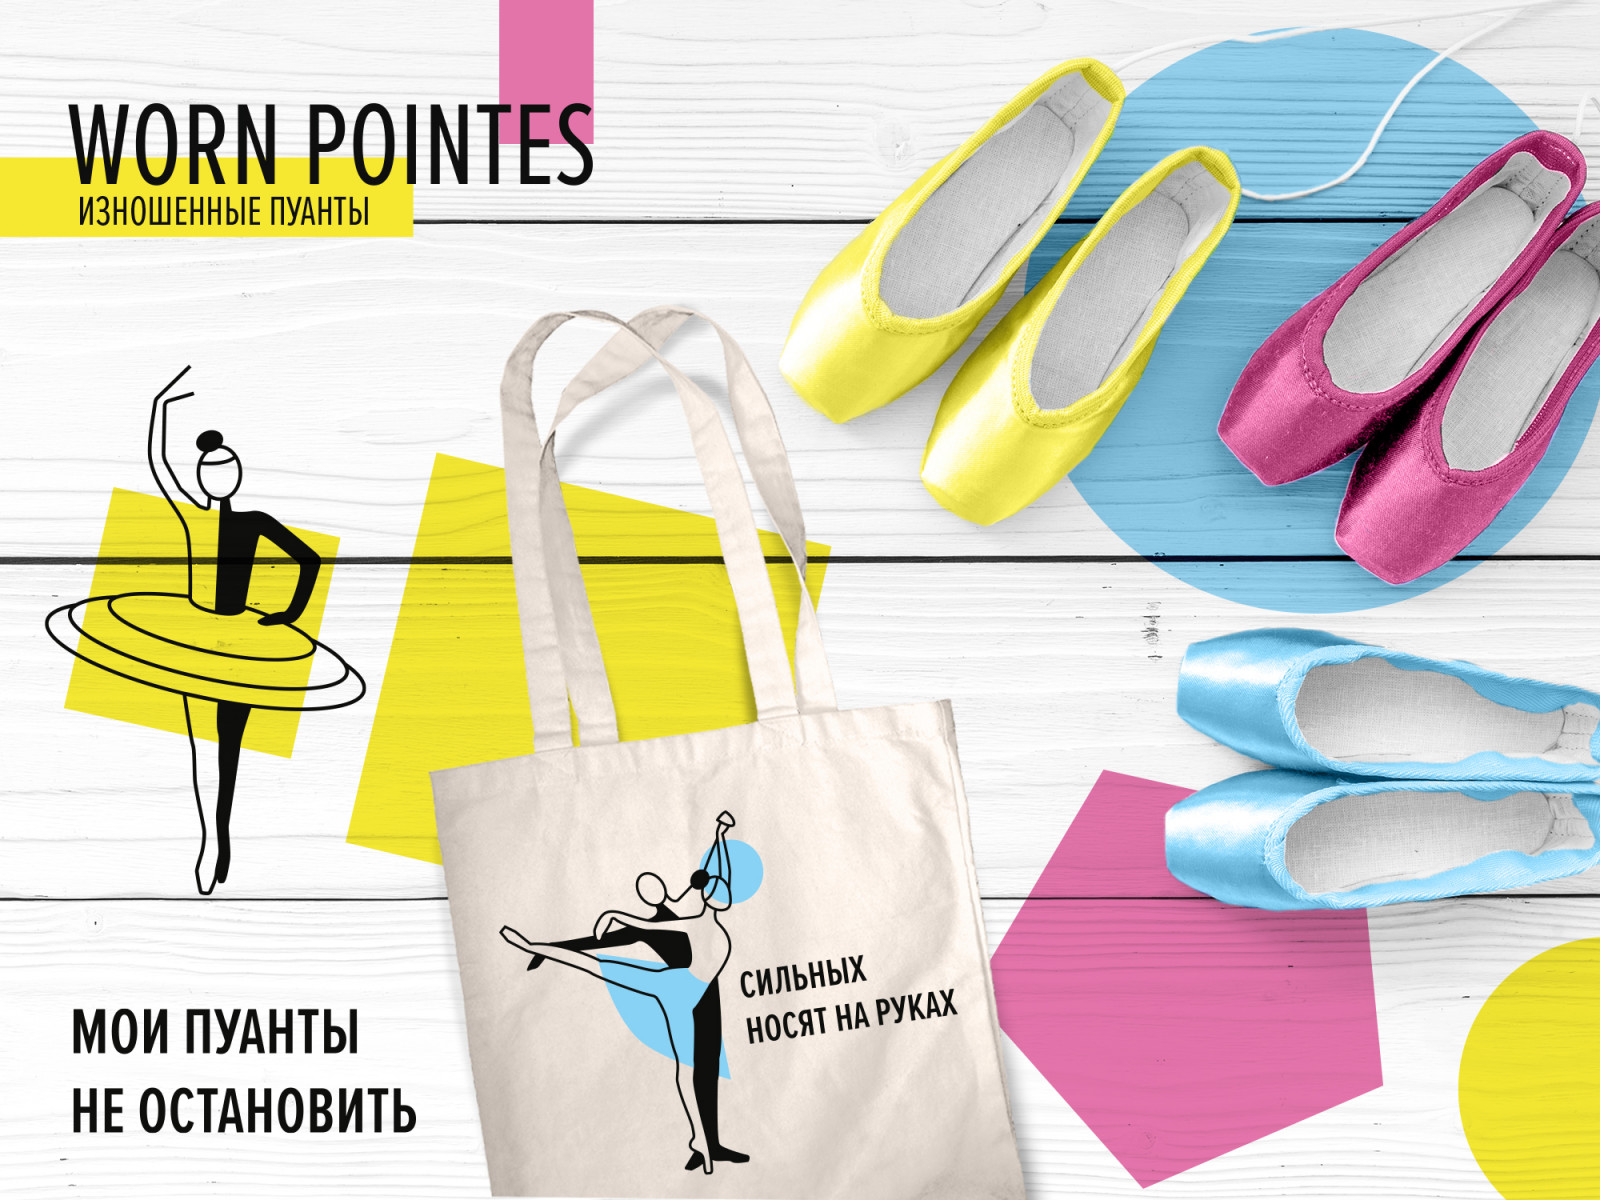 Merch for the Worn Pointes Foundation